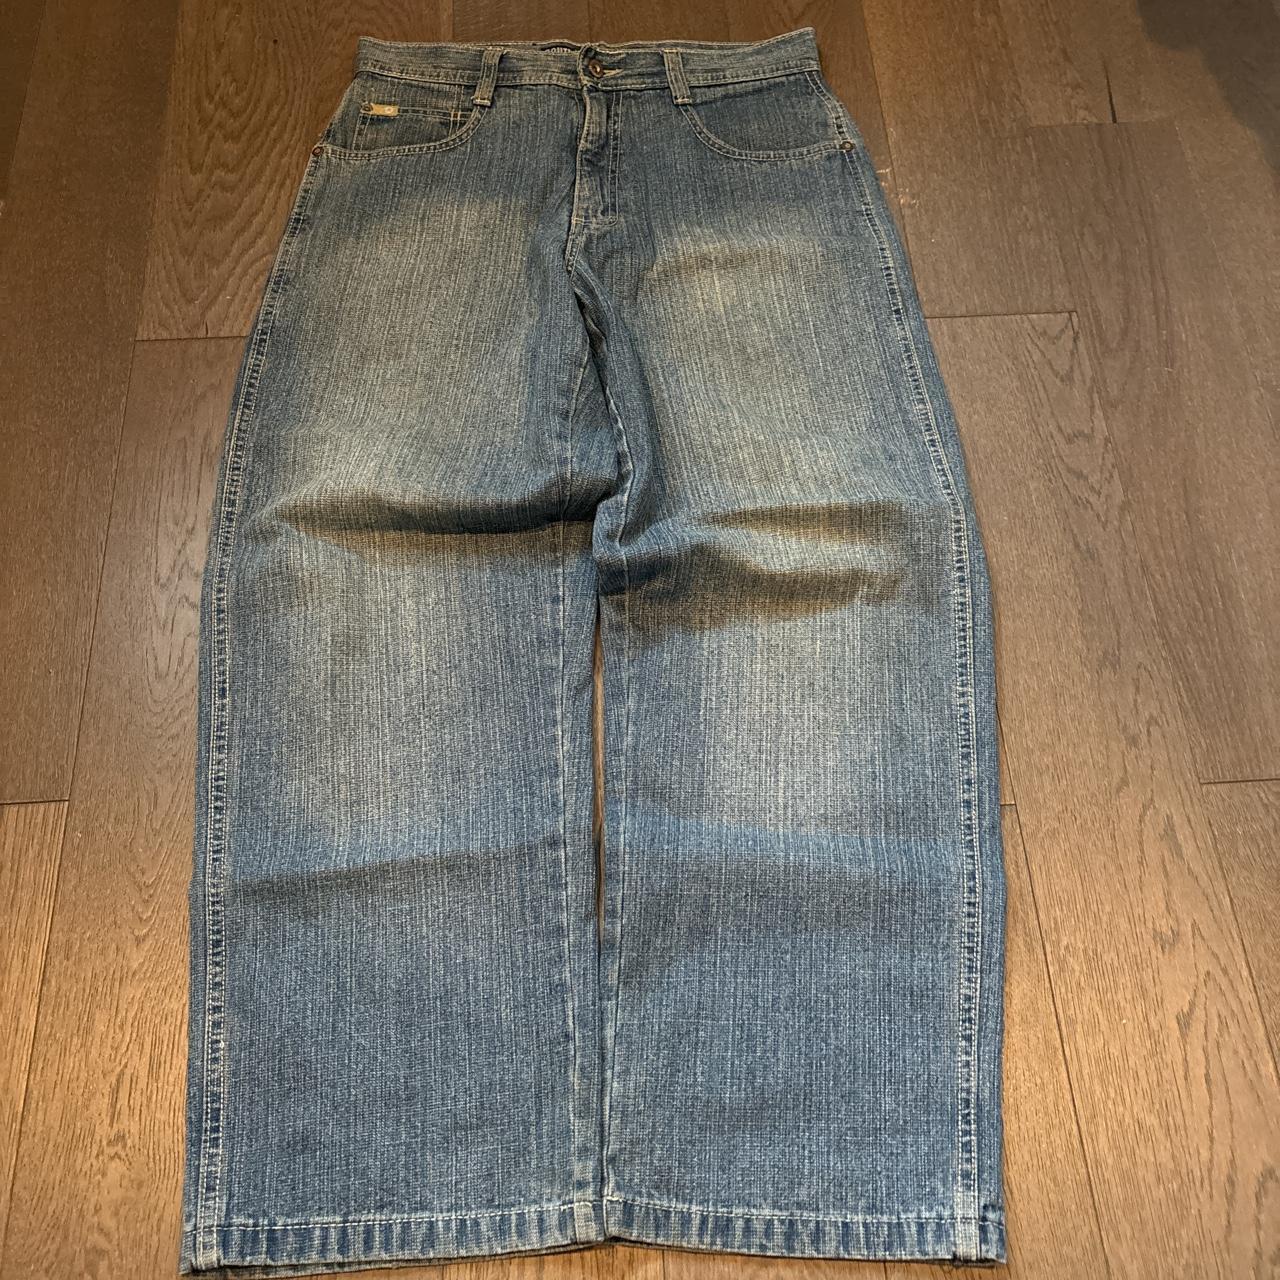 Super rare 2000s faded baggy asf southpole jeans,... - Depop